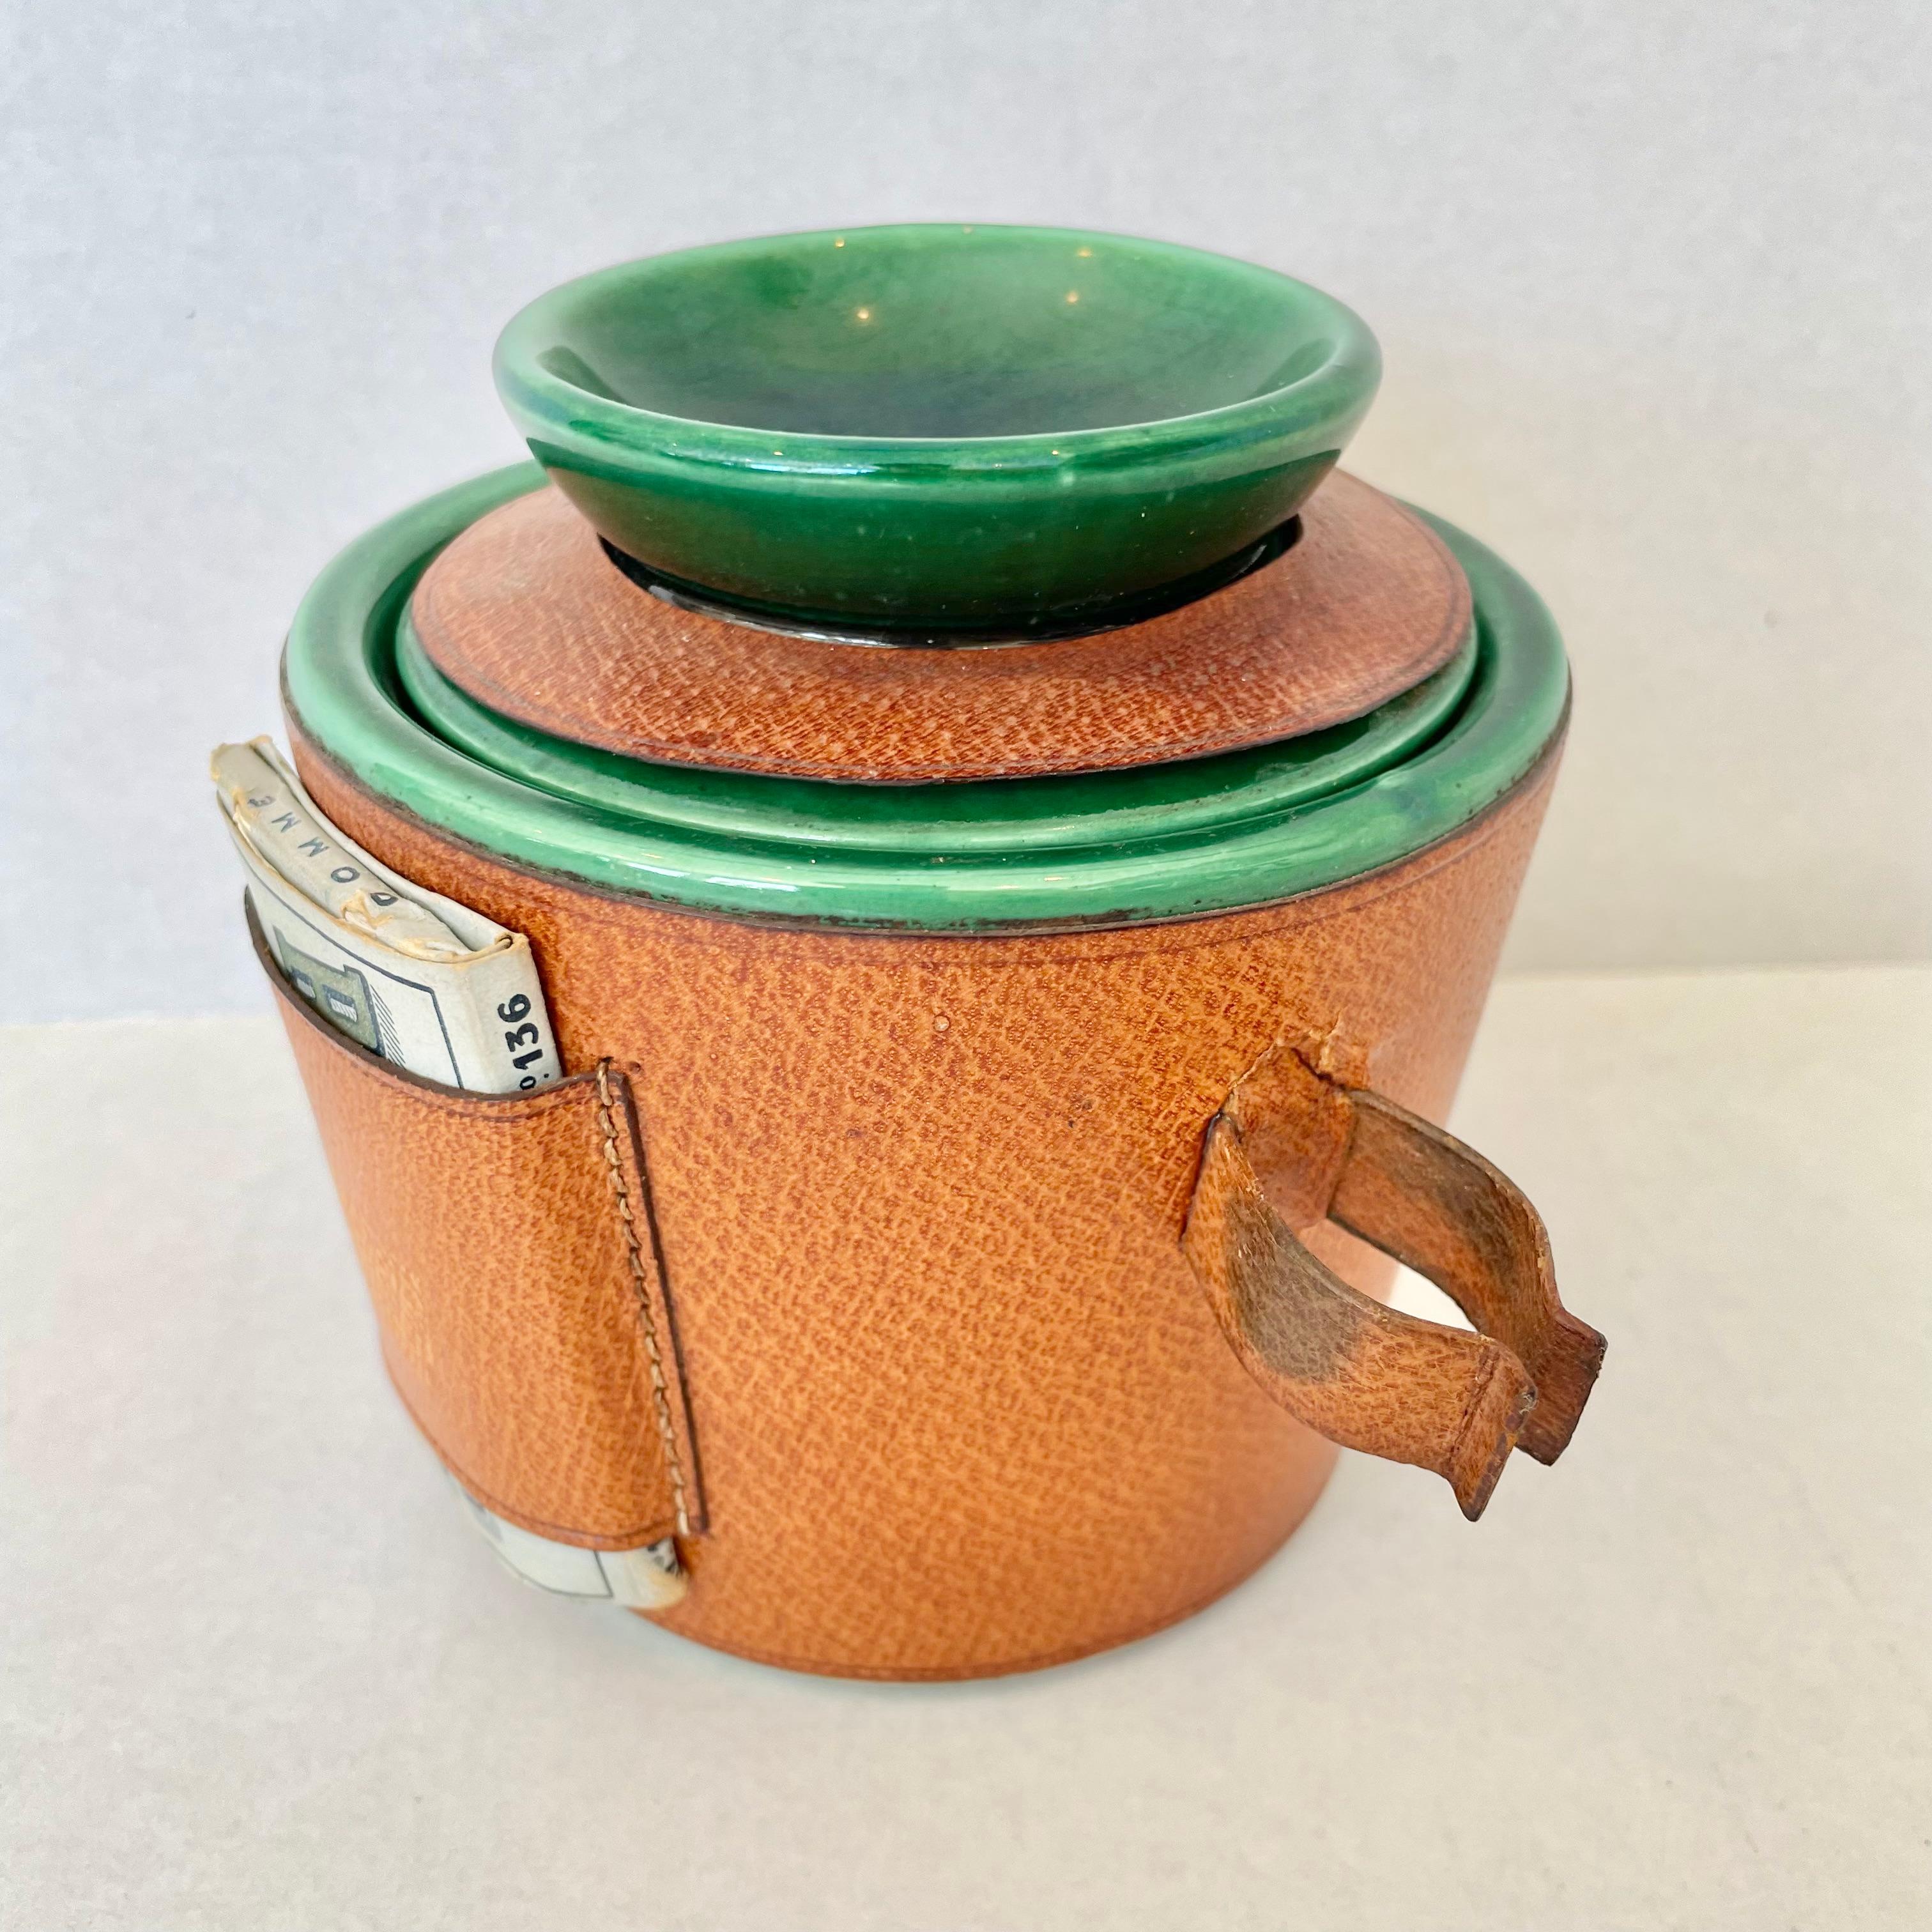 Handsome leather and ceramic tobacco/weed jar and ashtray by Longchamp. Stamped 